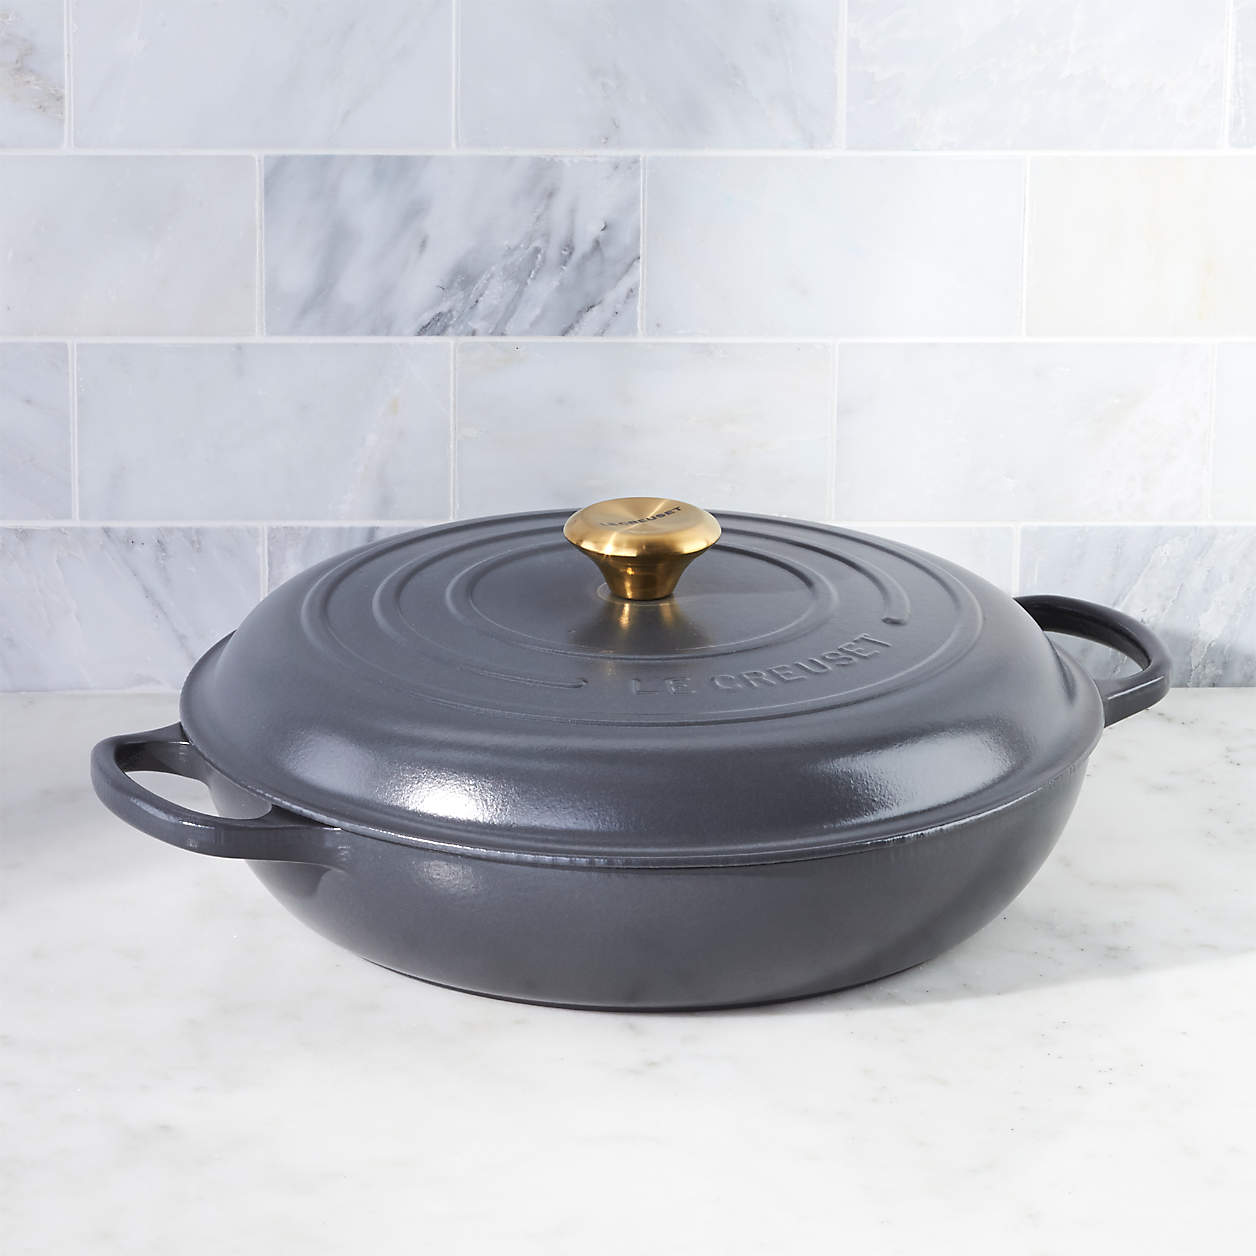 Shop Le Creuset ® Signature 5-Qt. Graphite Grey Everyday Pan from Crate and Barrel on Openhaus